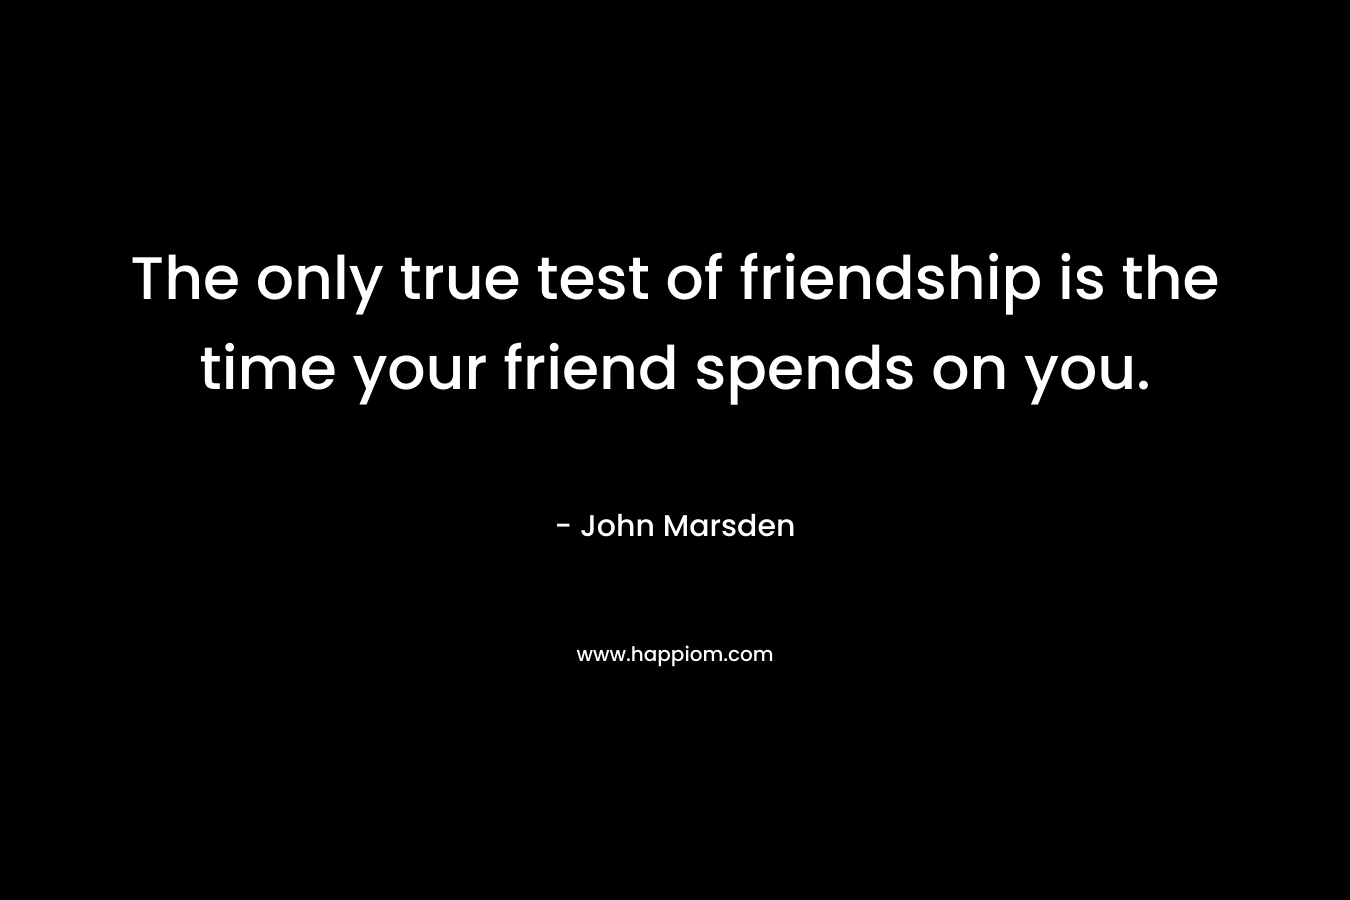 The only true test of friendship is the time your friend spends on you.